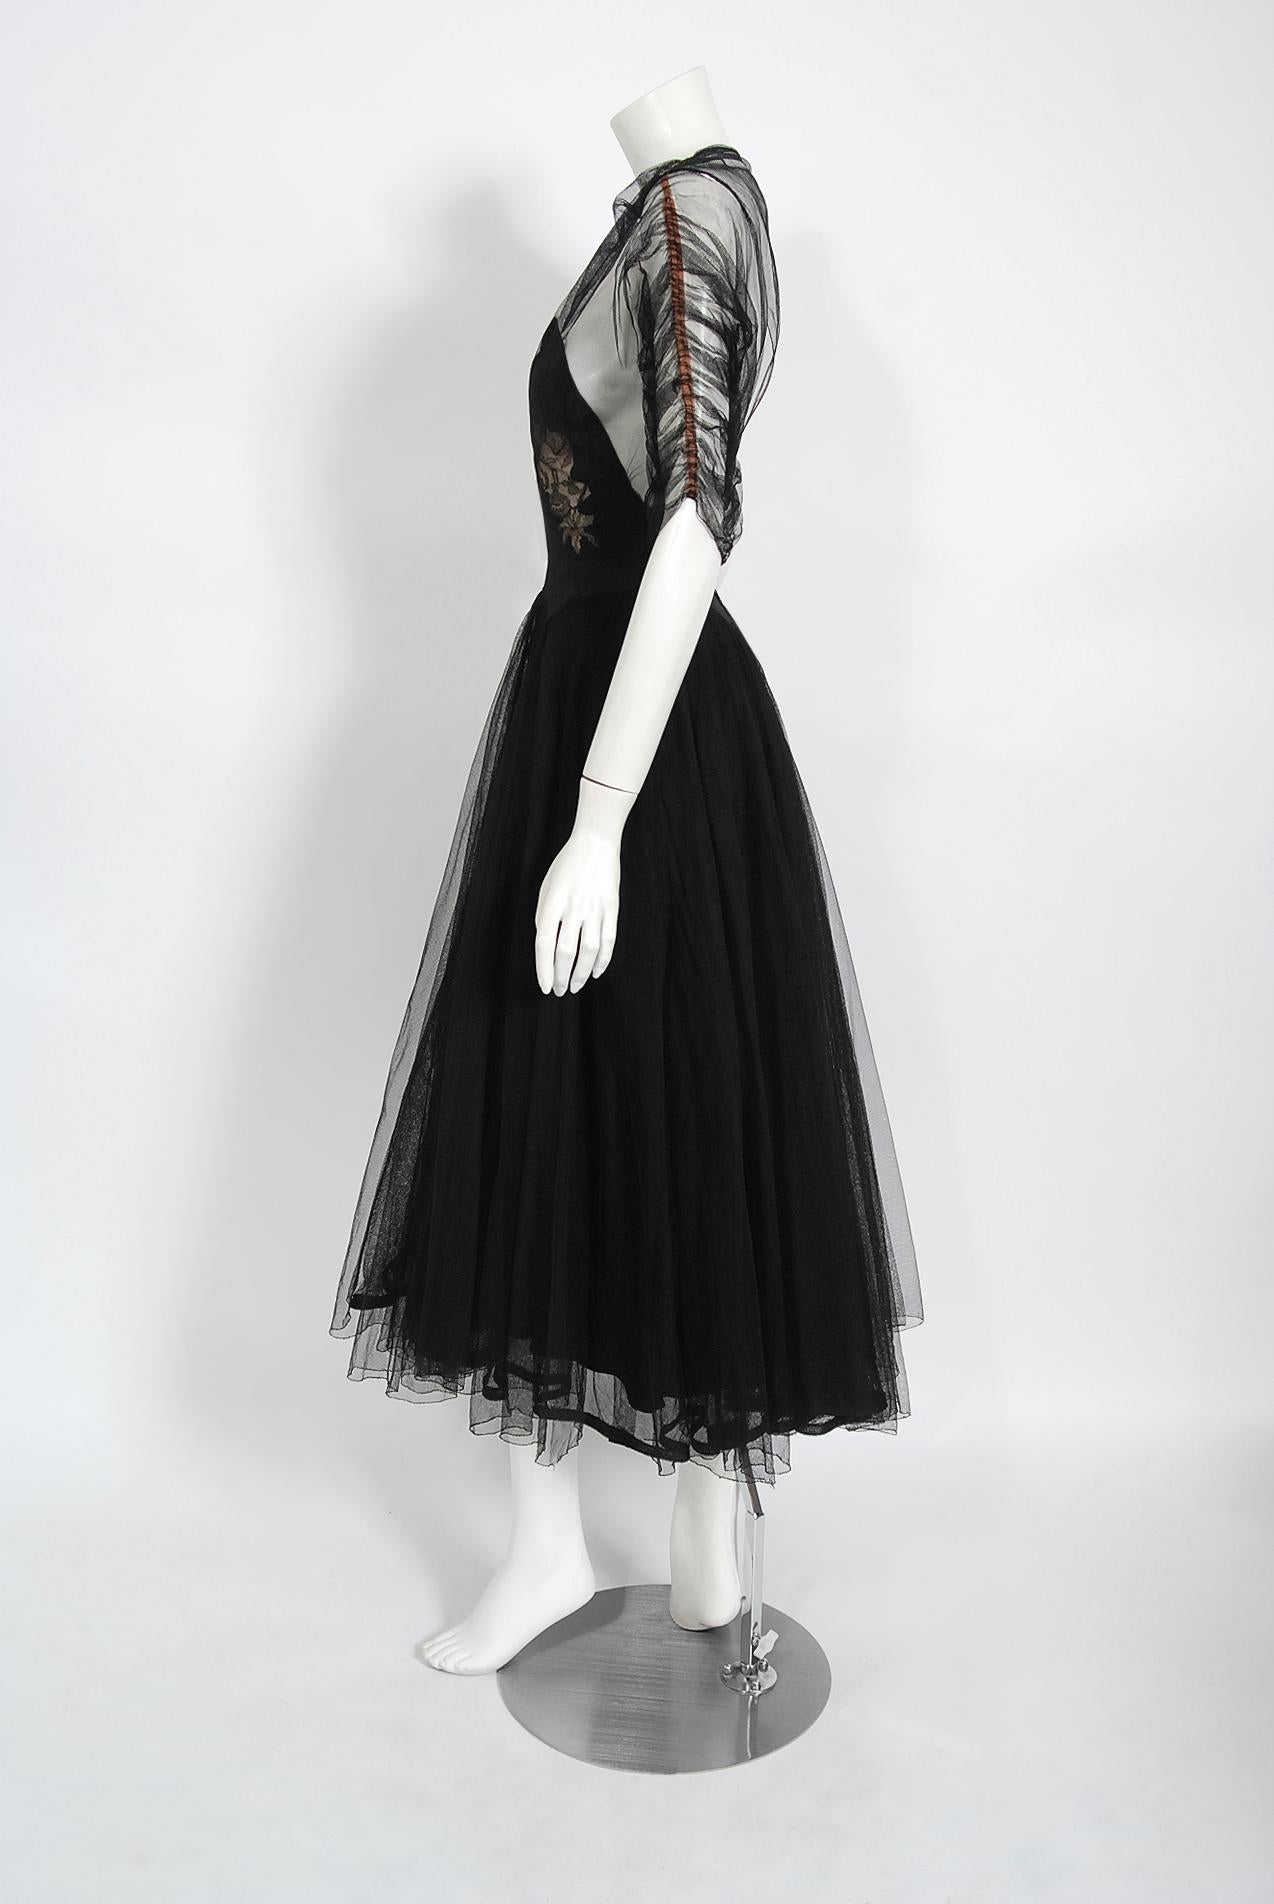 Women's Vintage 1945 Irene Lentz Couture Documented Sheer Net-Tulle Lace Illusion Dress